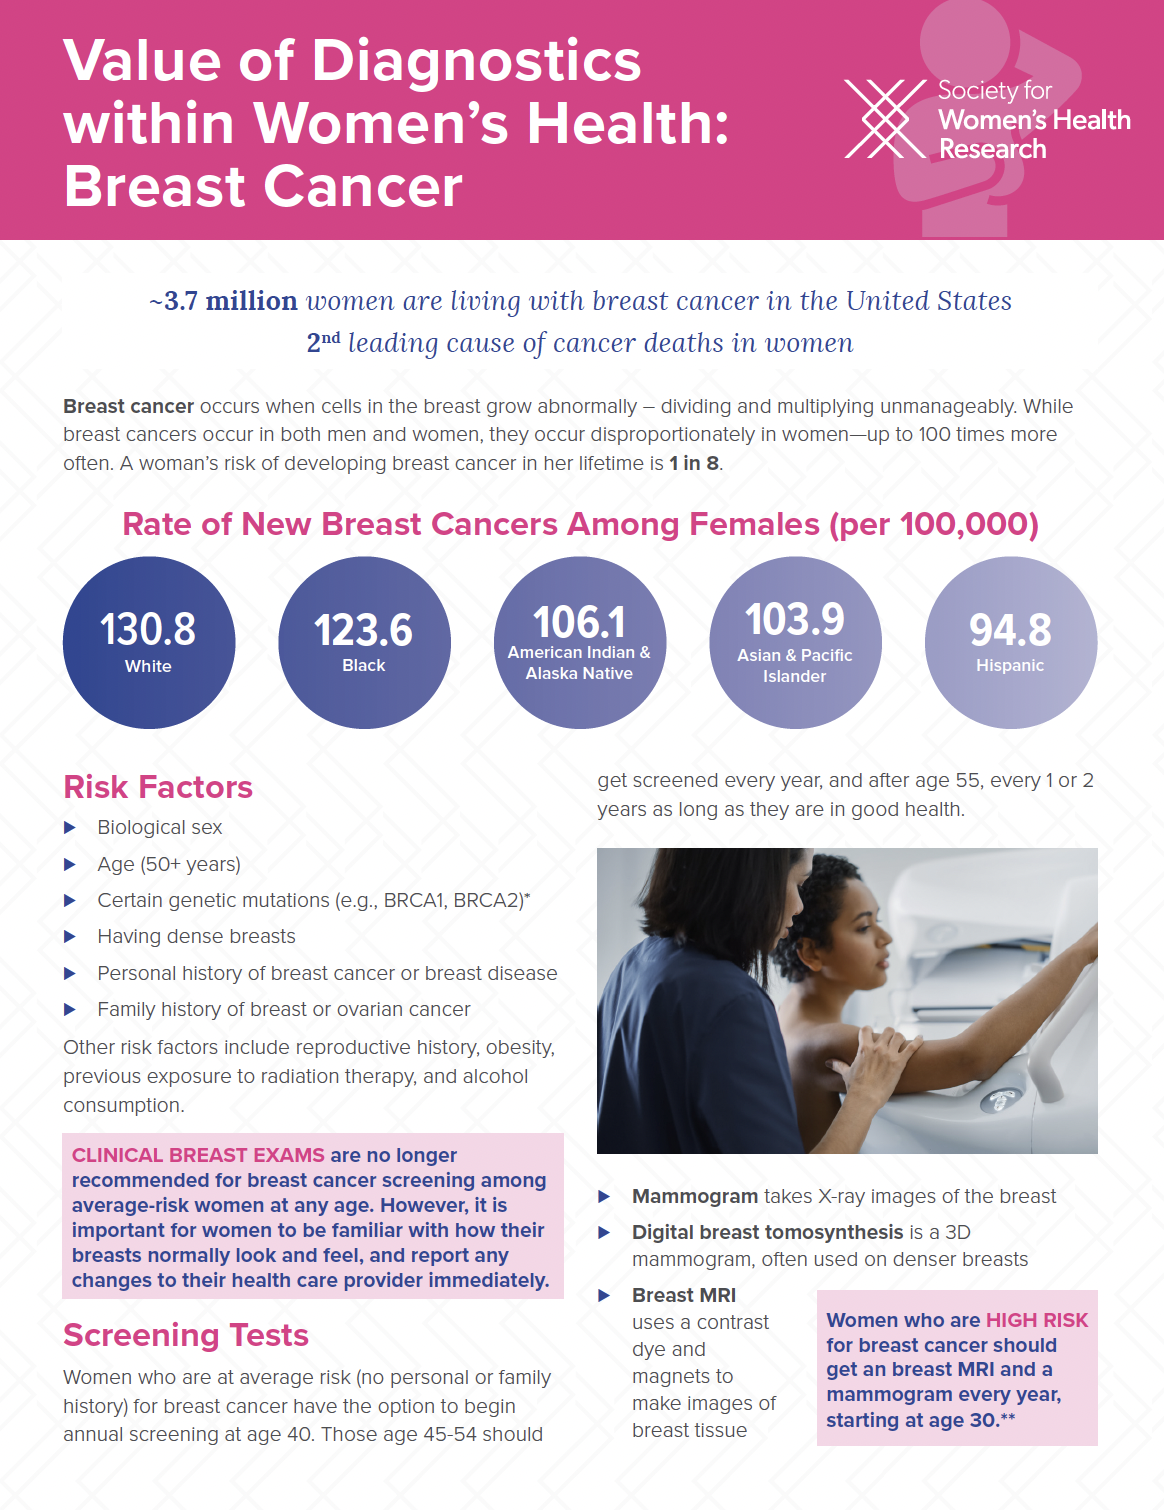 Value of Diagnostics within Women’s Health: Breast Cancer - SWHR